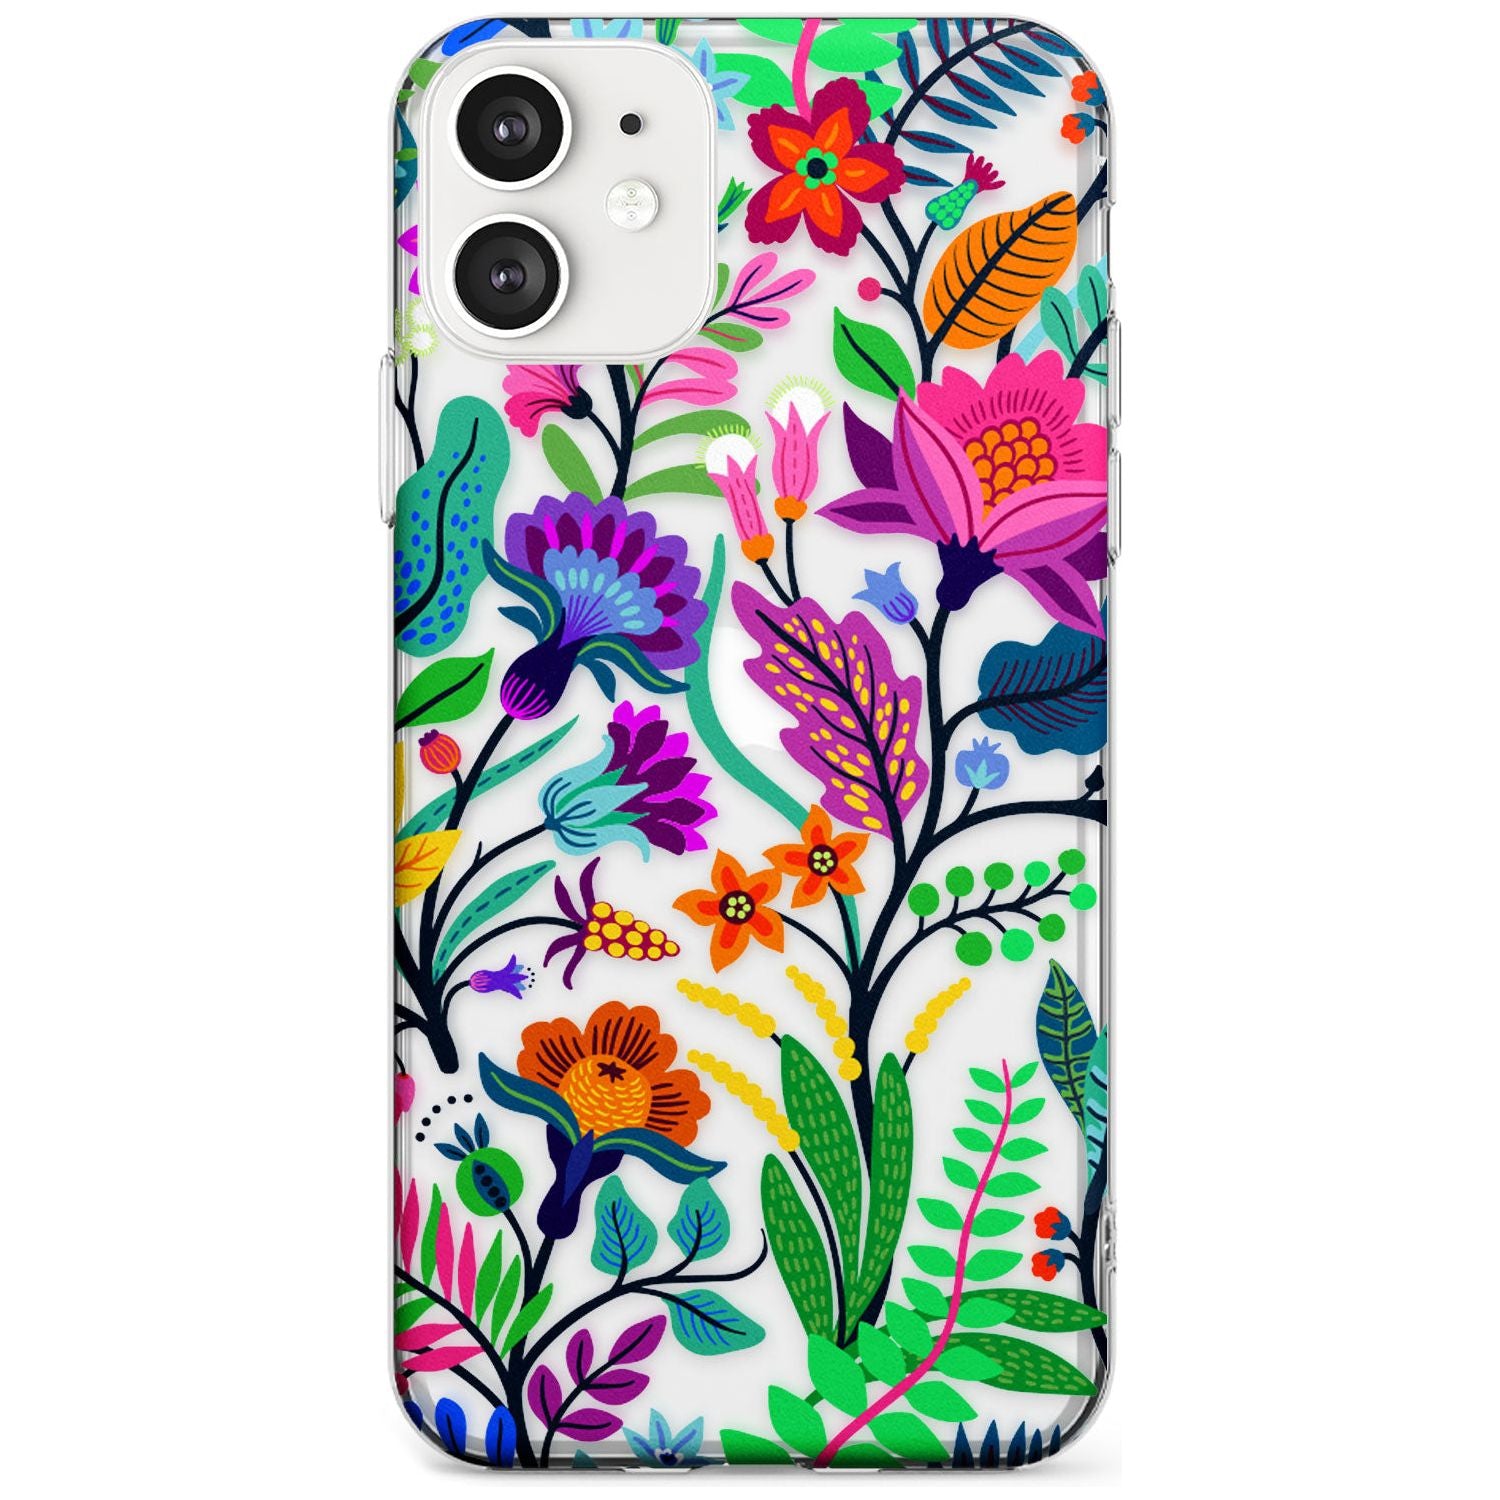 Floral Vibe Slim TPU Phone Case for iPhone 11